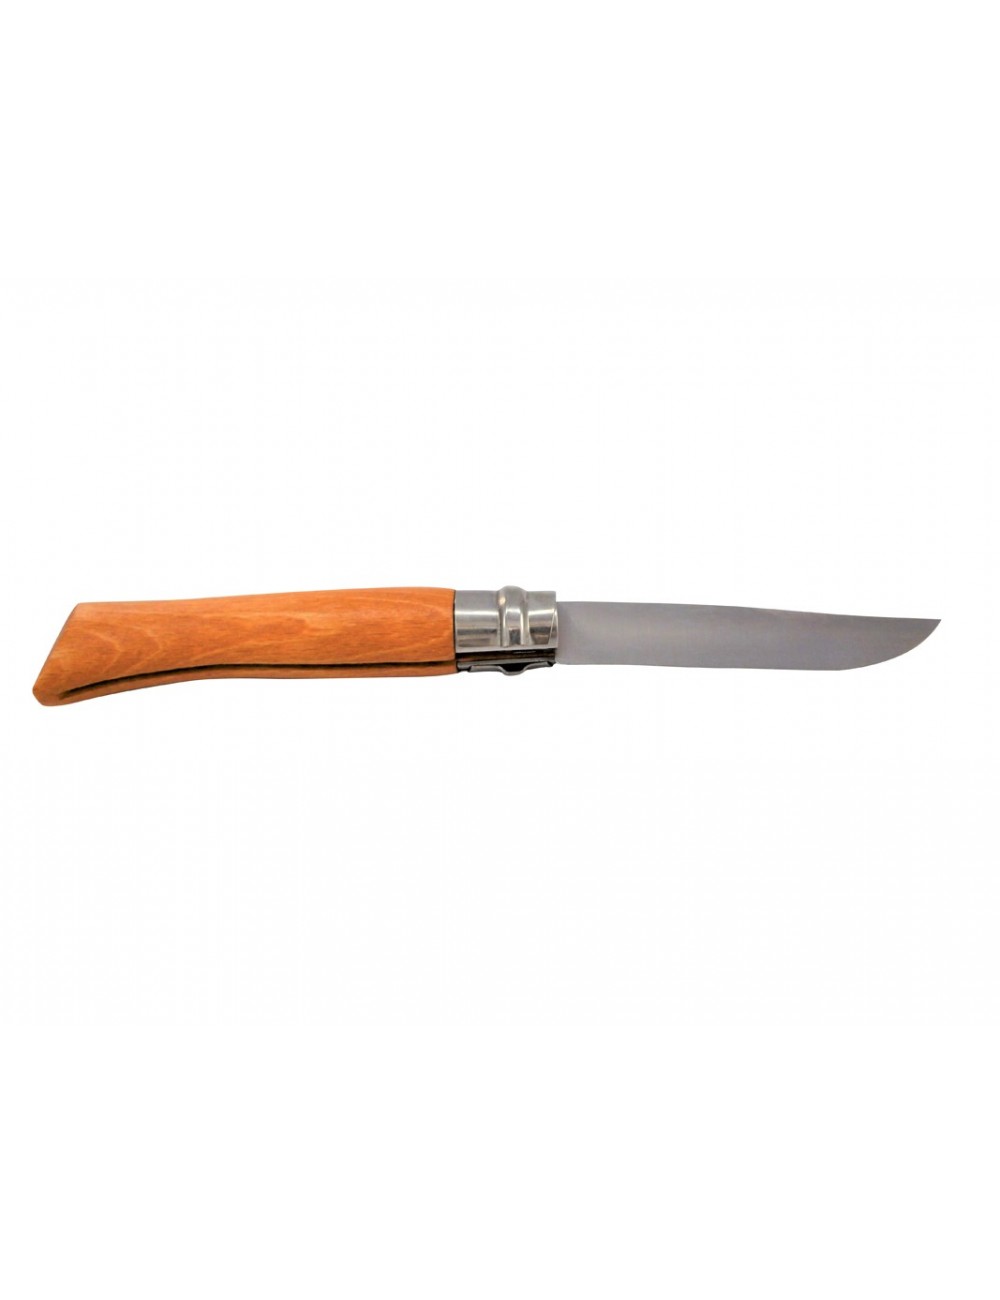 COUTEAU OPINEL N°10 - CARBONE